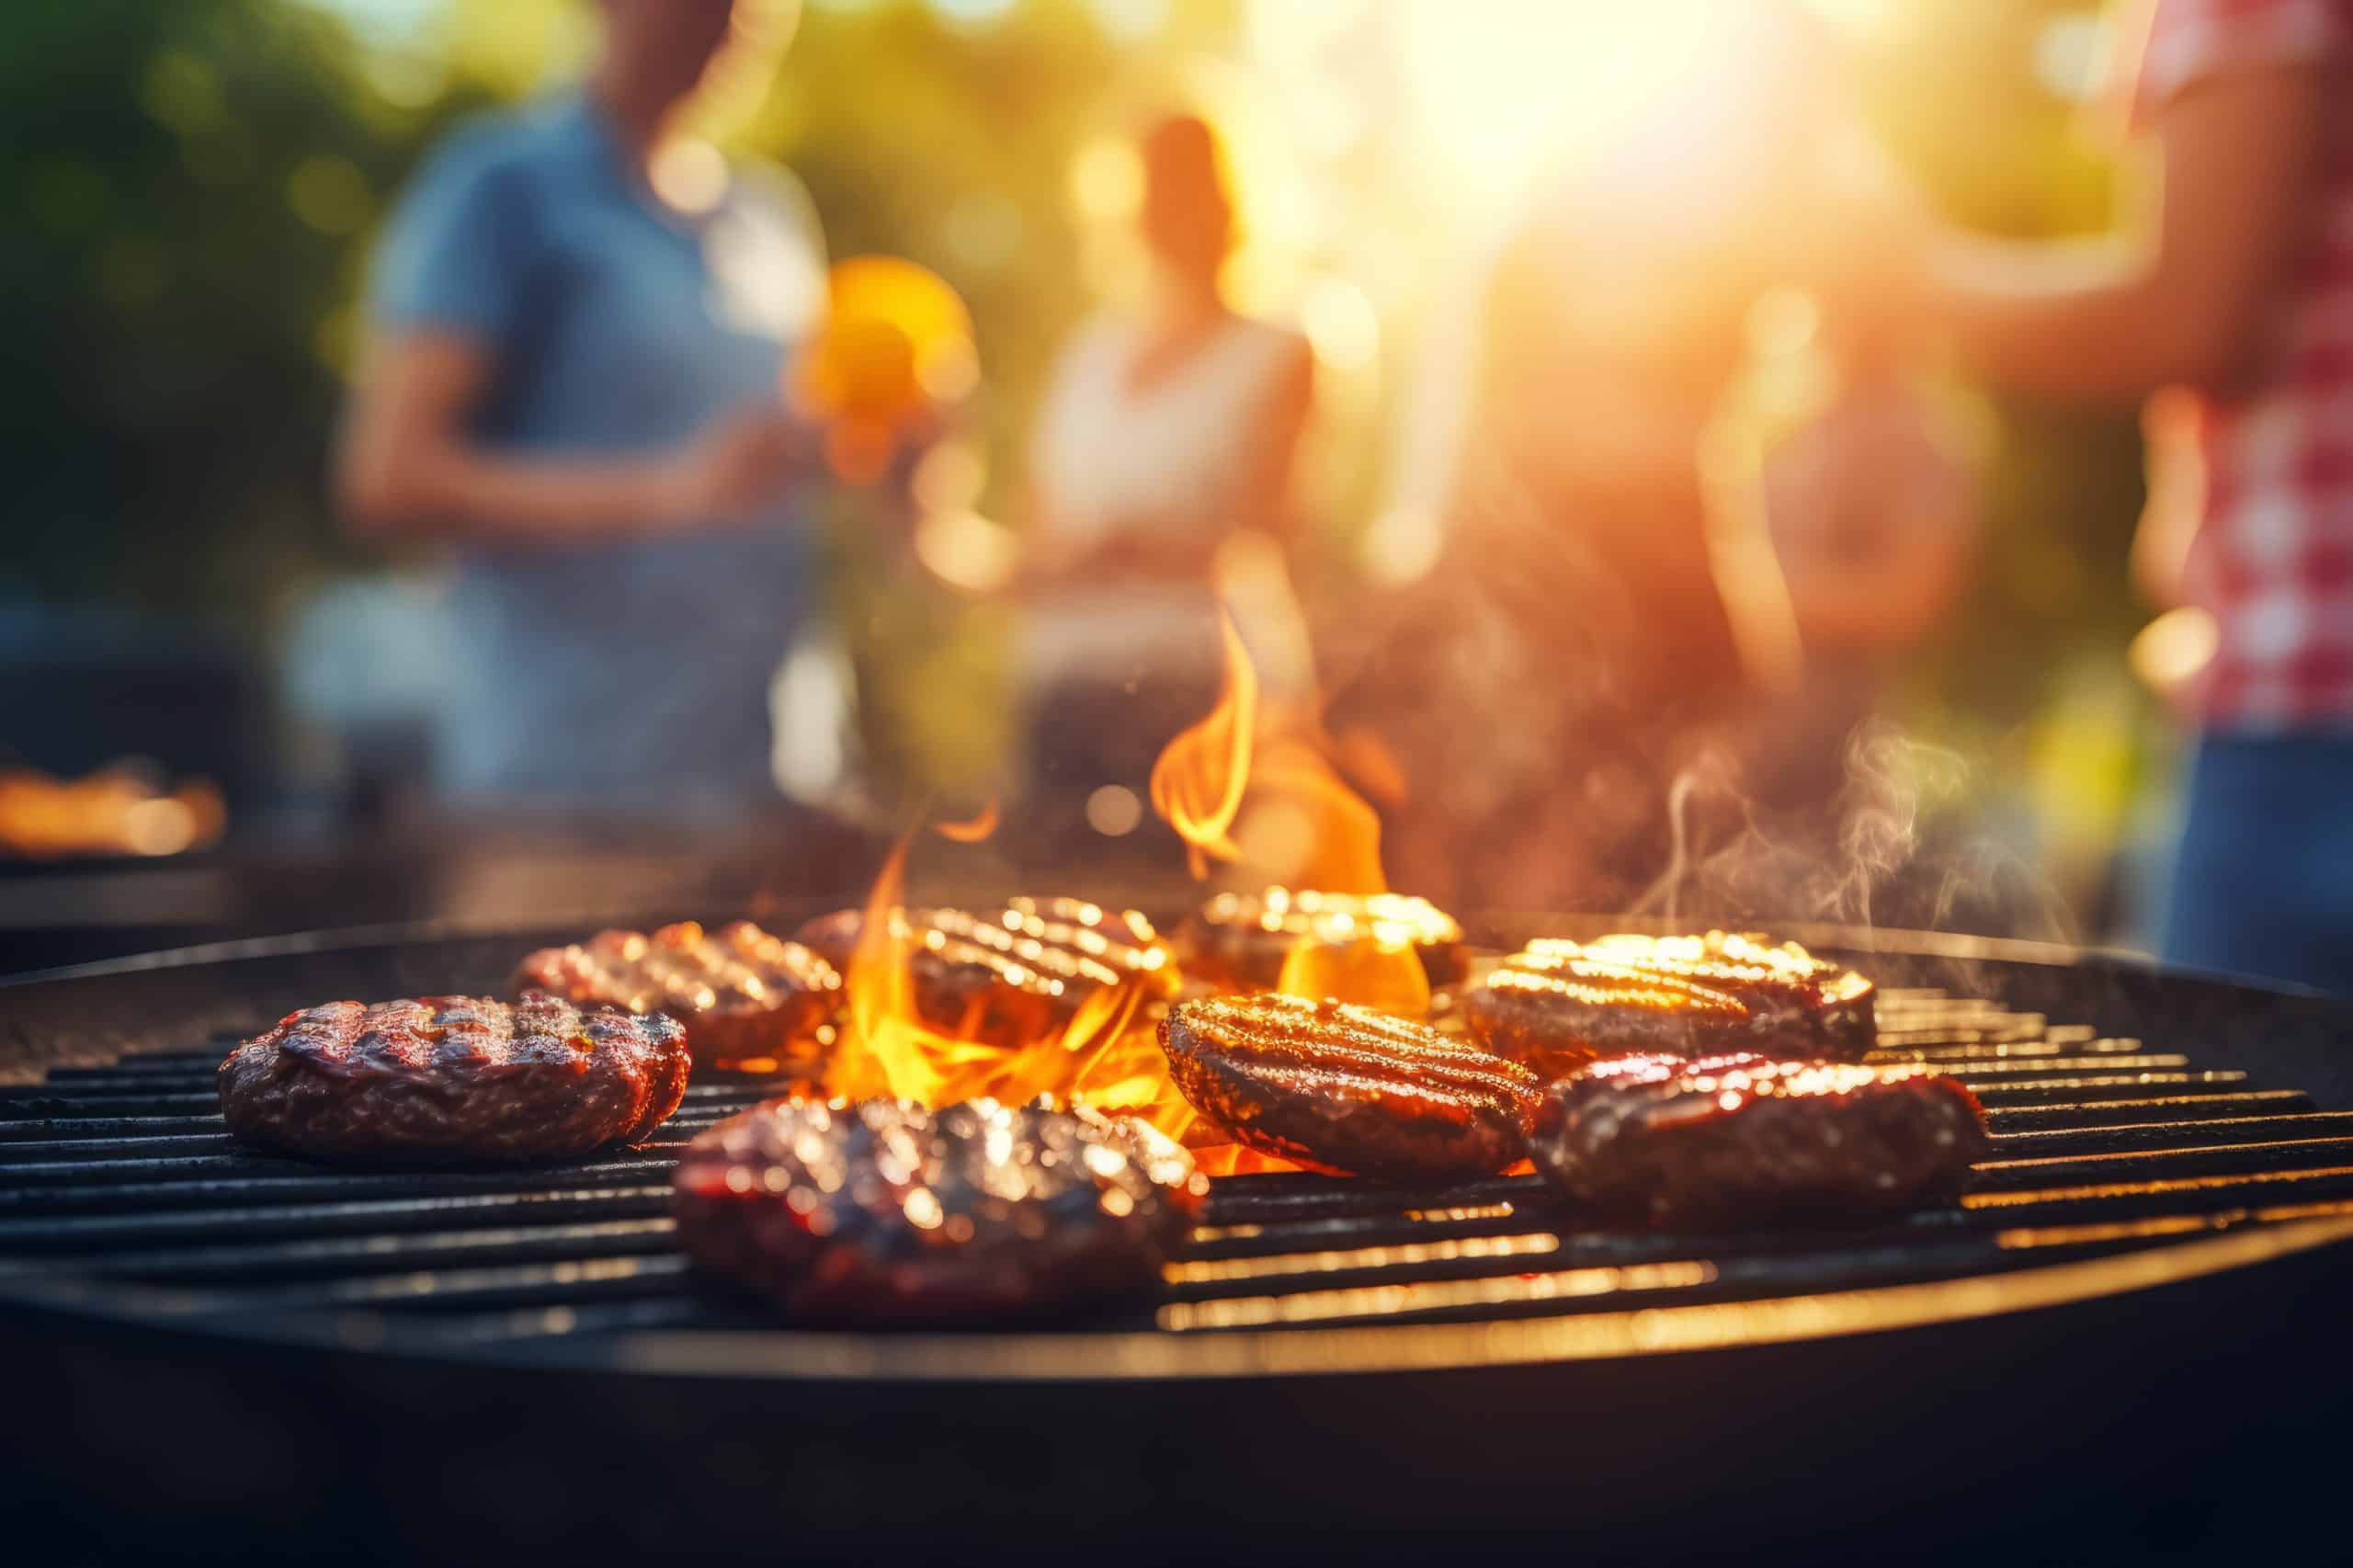 Featured image for “Summer Danger – 14 Simple Ways to Safely Grill and Avoid High Risk Homeowners Insurance”